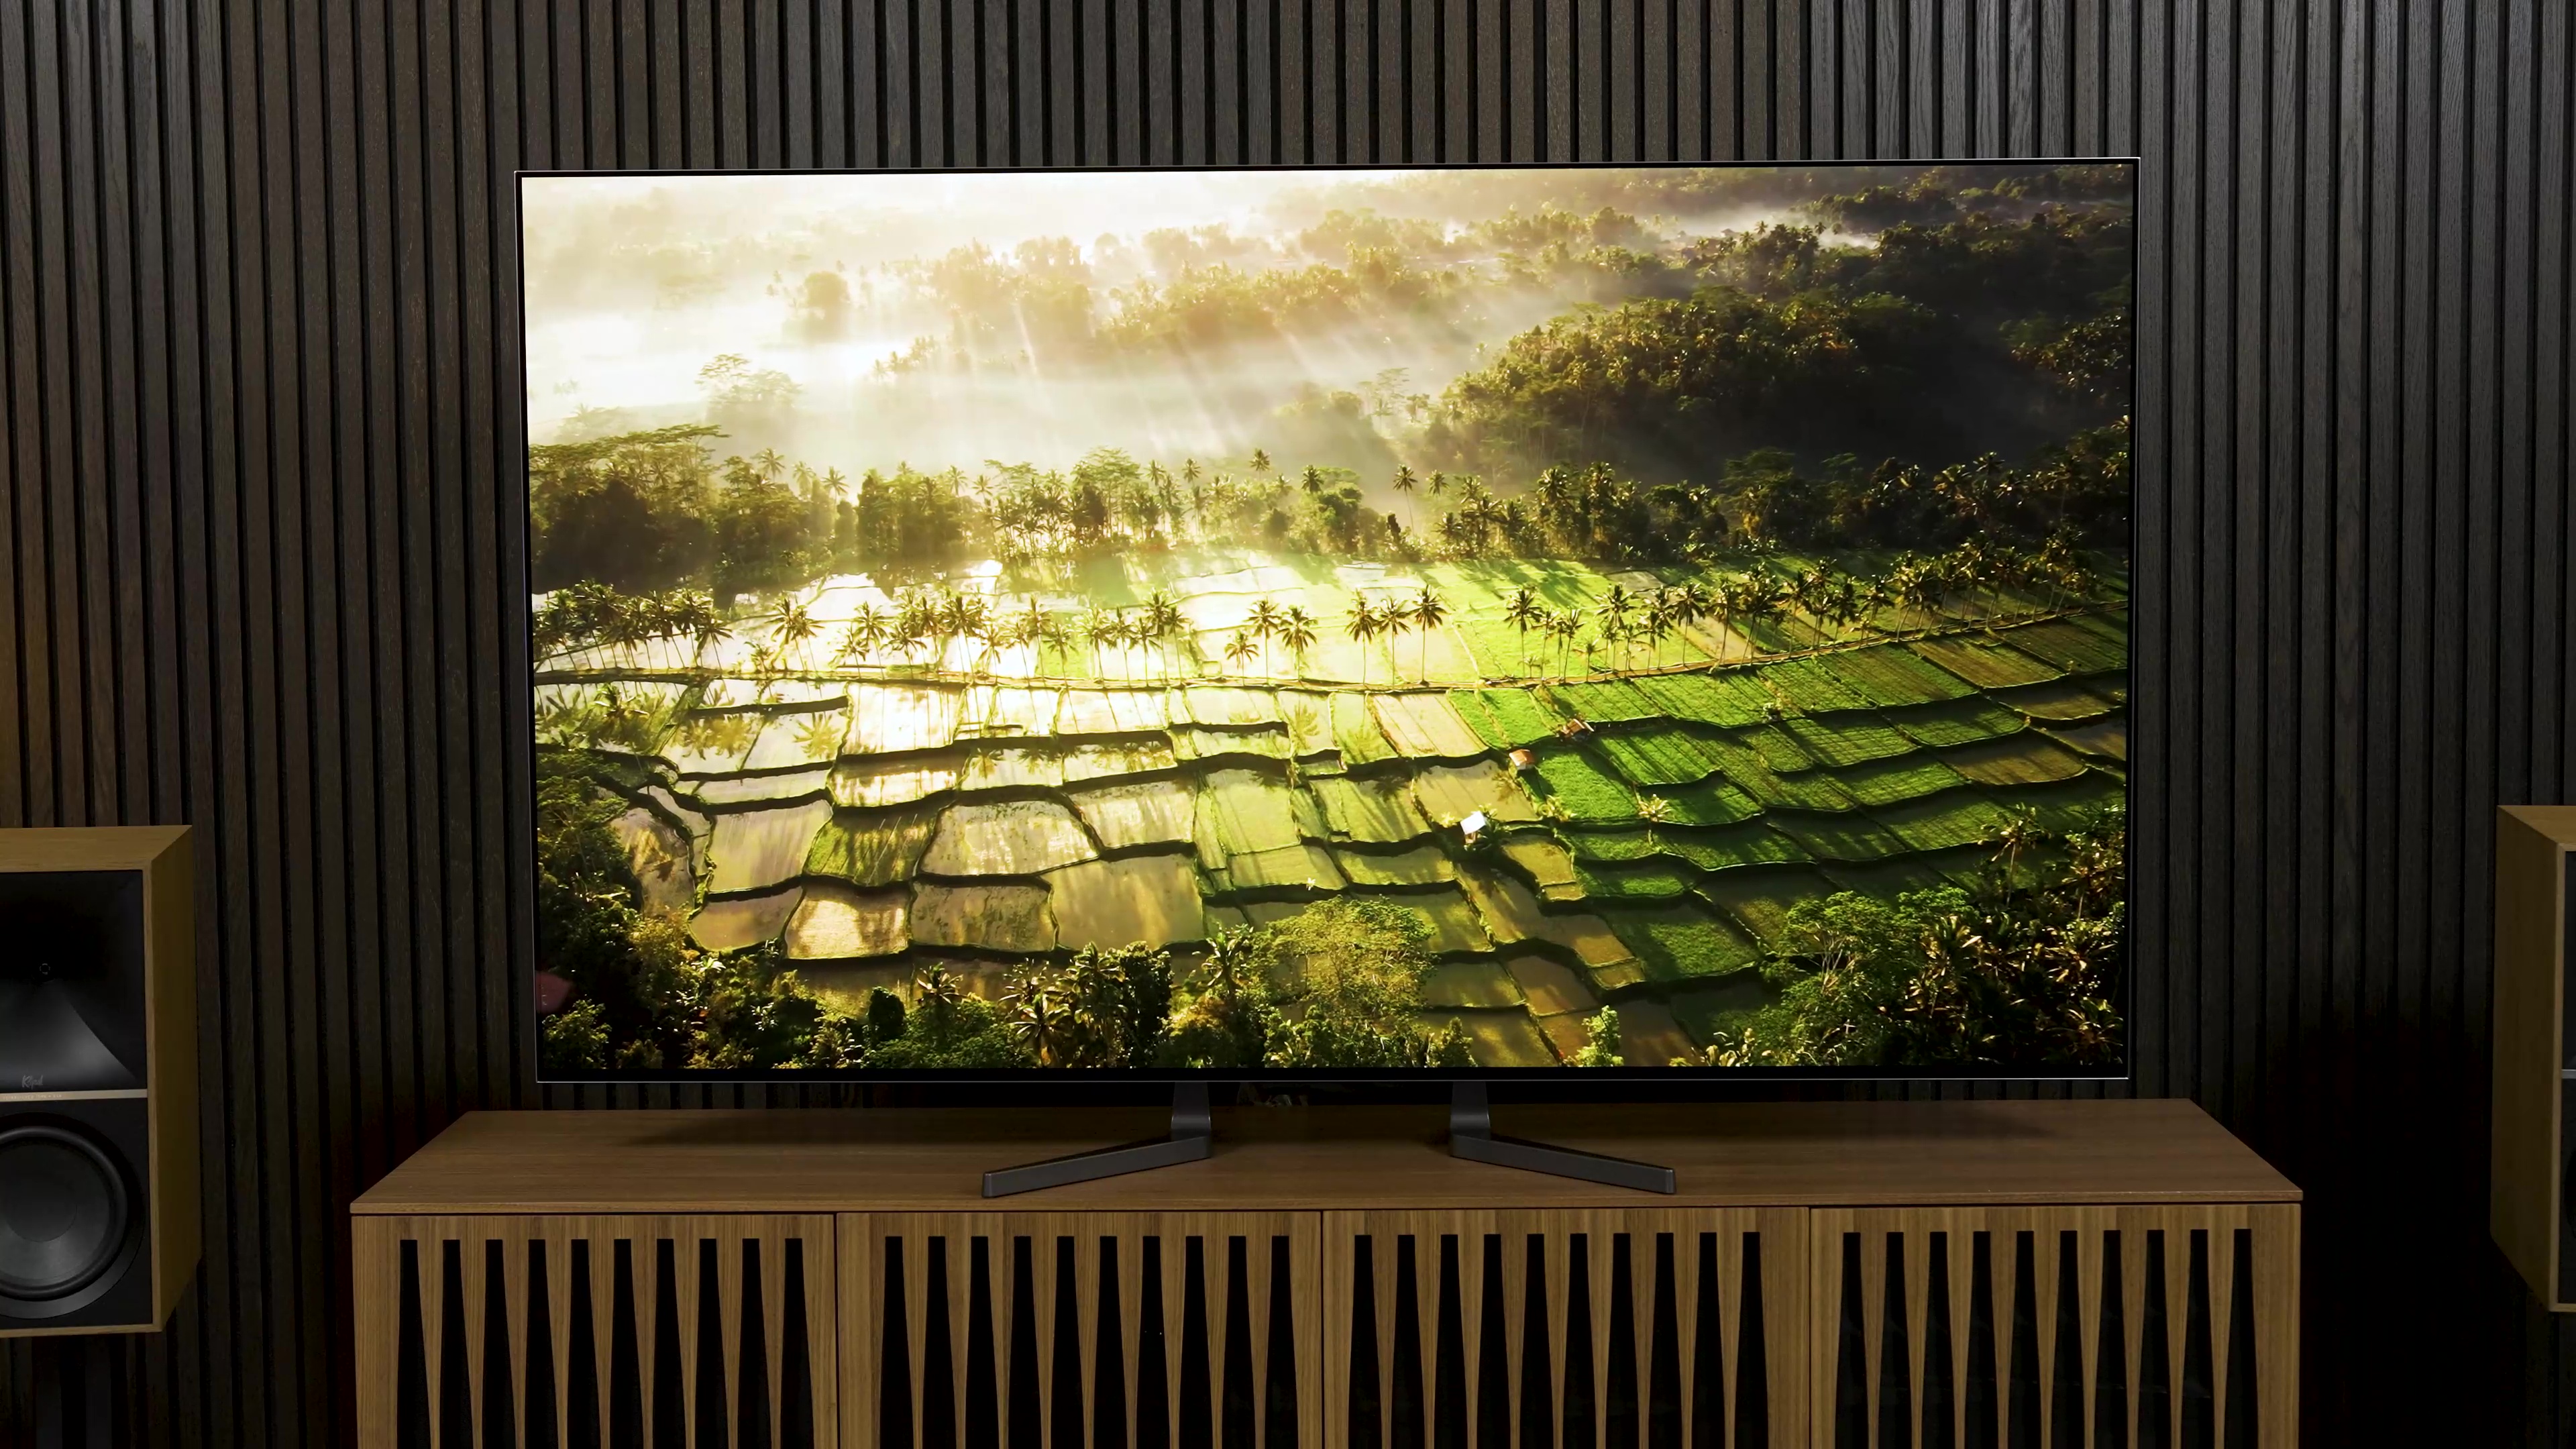 LG's wireless M-Series OLED TV tech is the future we need